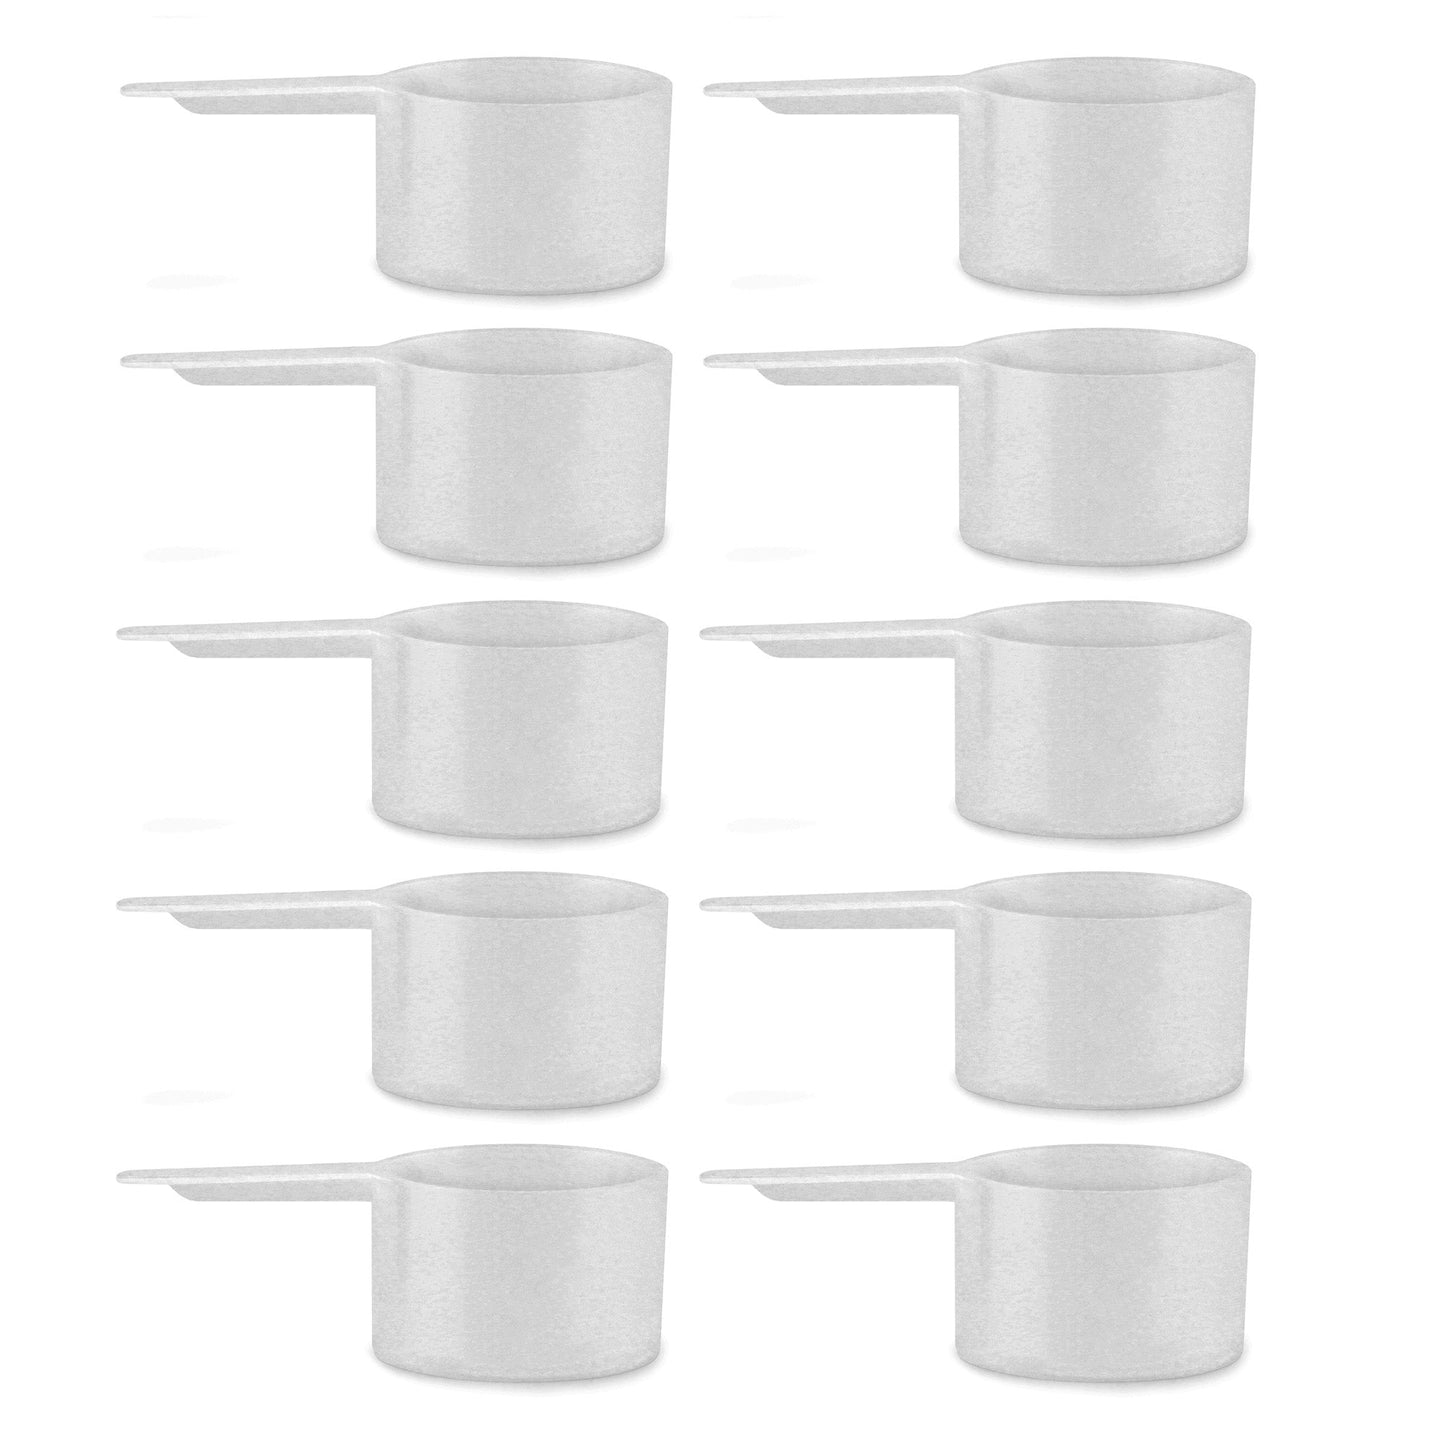 43cc / 3-Tablespoon Scoops (10-Pack)